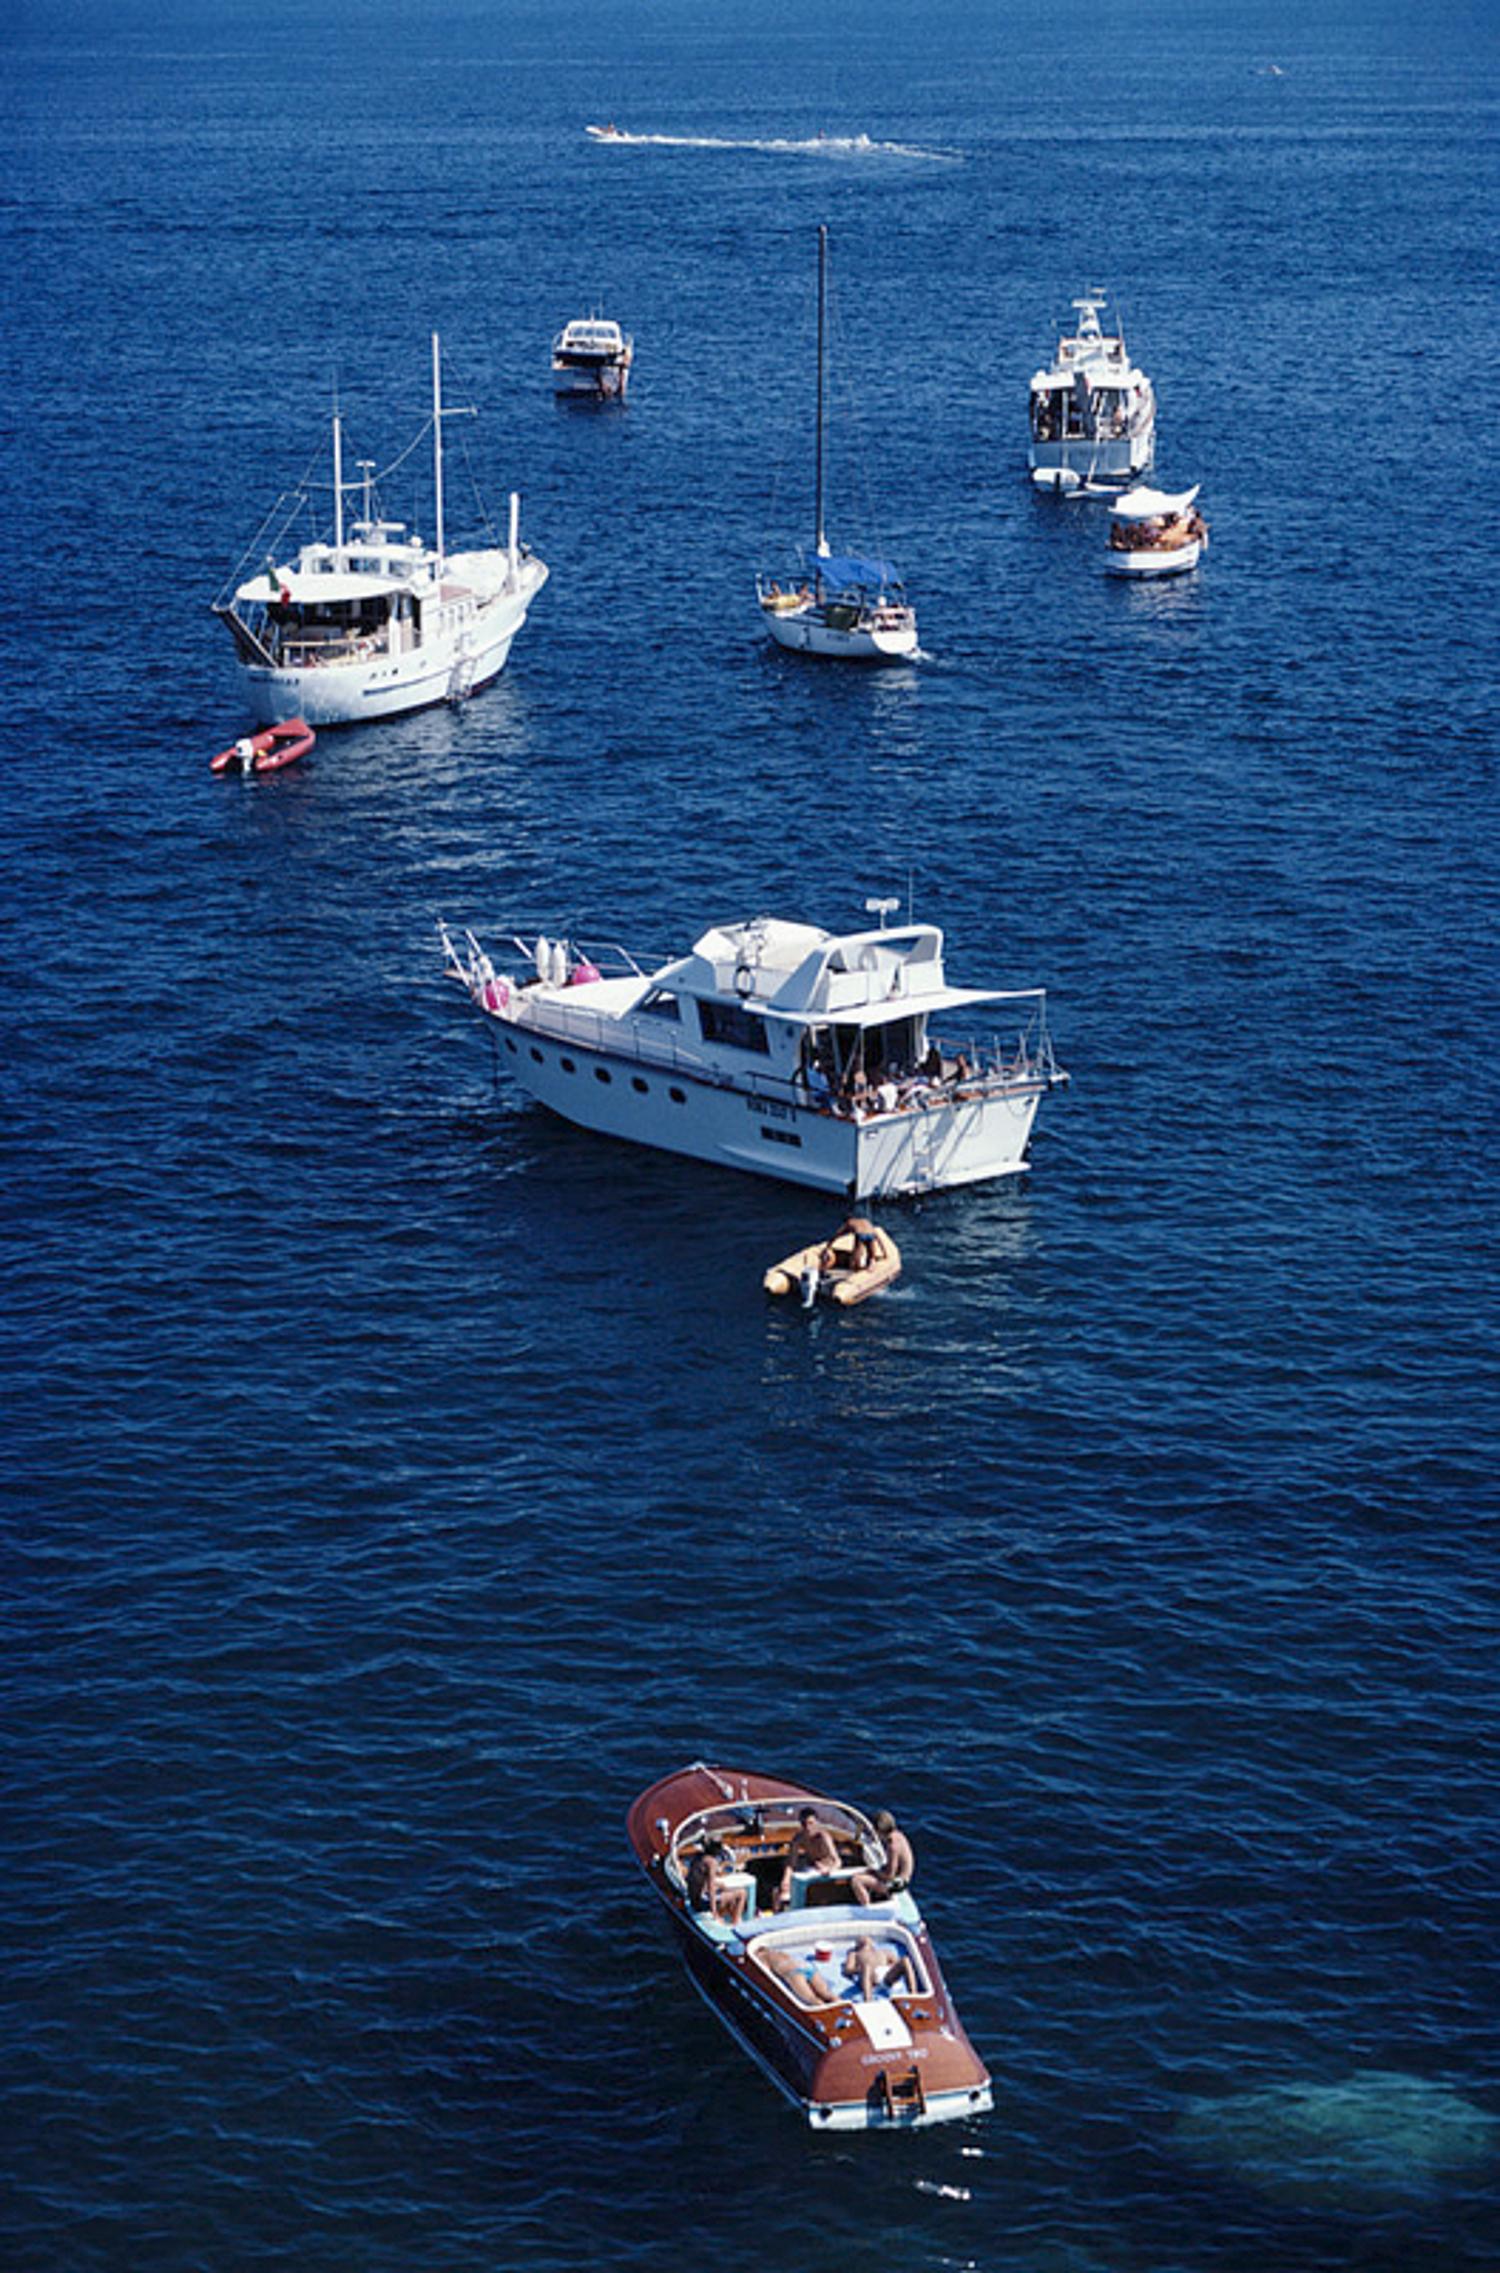 Yachting Holiday 
1980
by Slim Aarons

Slim Aarons Limited Estate Edition

A small flotilla of pleasure crafts moored in the sea off Italy, August 1980.

unframed
c type print
printed 2023
24 x 20"  - paper size

Limited to 150 prints only –